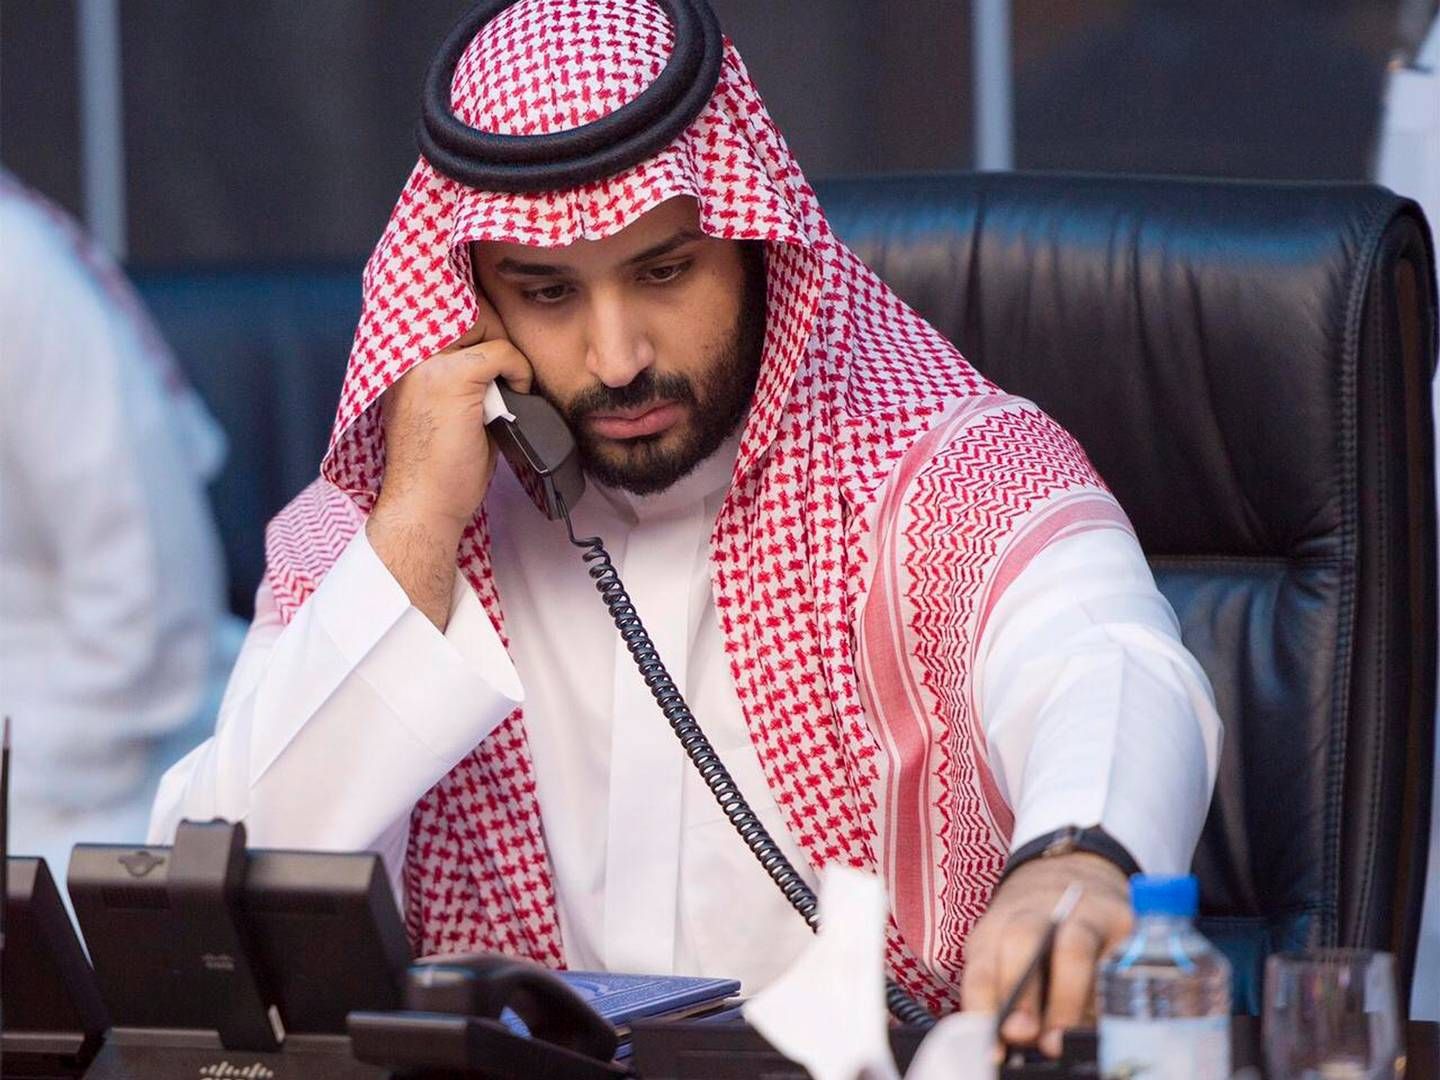 Crown Prince Mohammad Bin Salman appears to be scaling back his ambitions for the desert project Neom, which has run into funding problems. | Photo: Handout/Reuters/Ritzau Scanpix